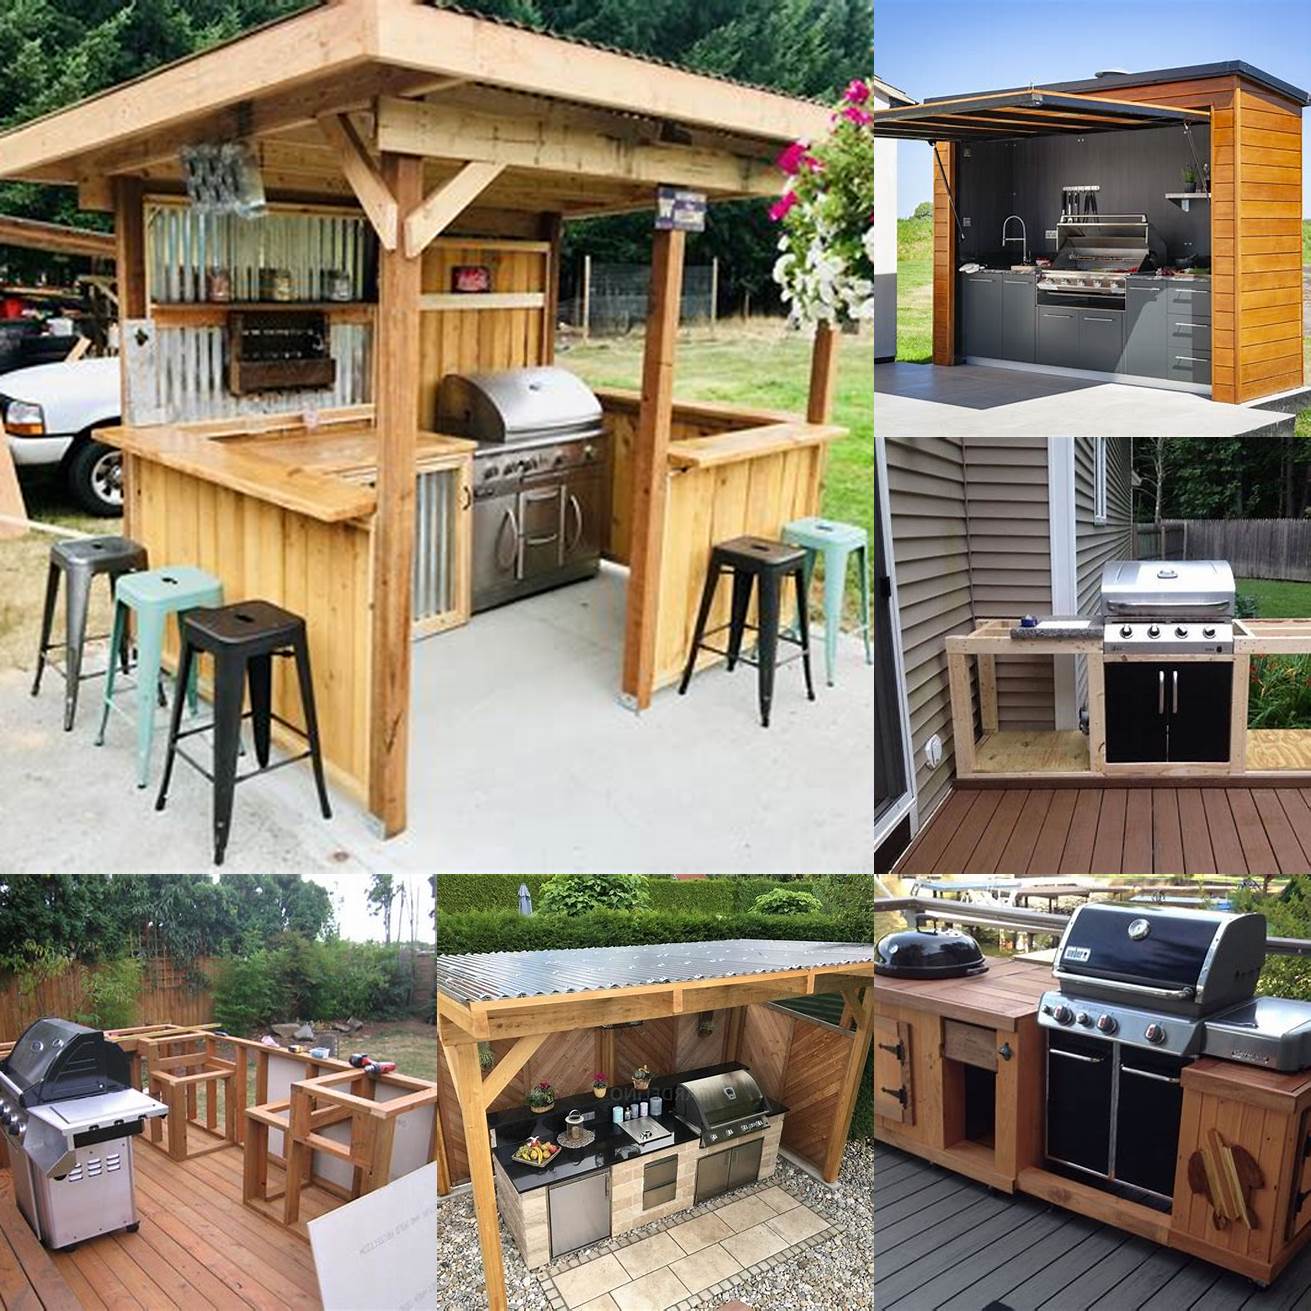 5 The Backyard BBQ Use your portable kitchen for a backyard BBQ and invite your friends and family over for a fun and delicious gathering